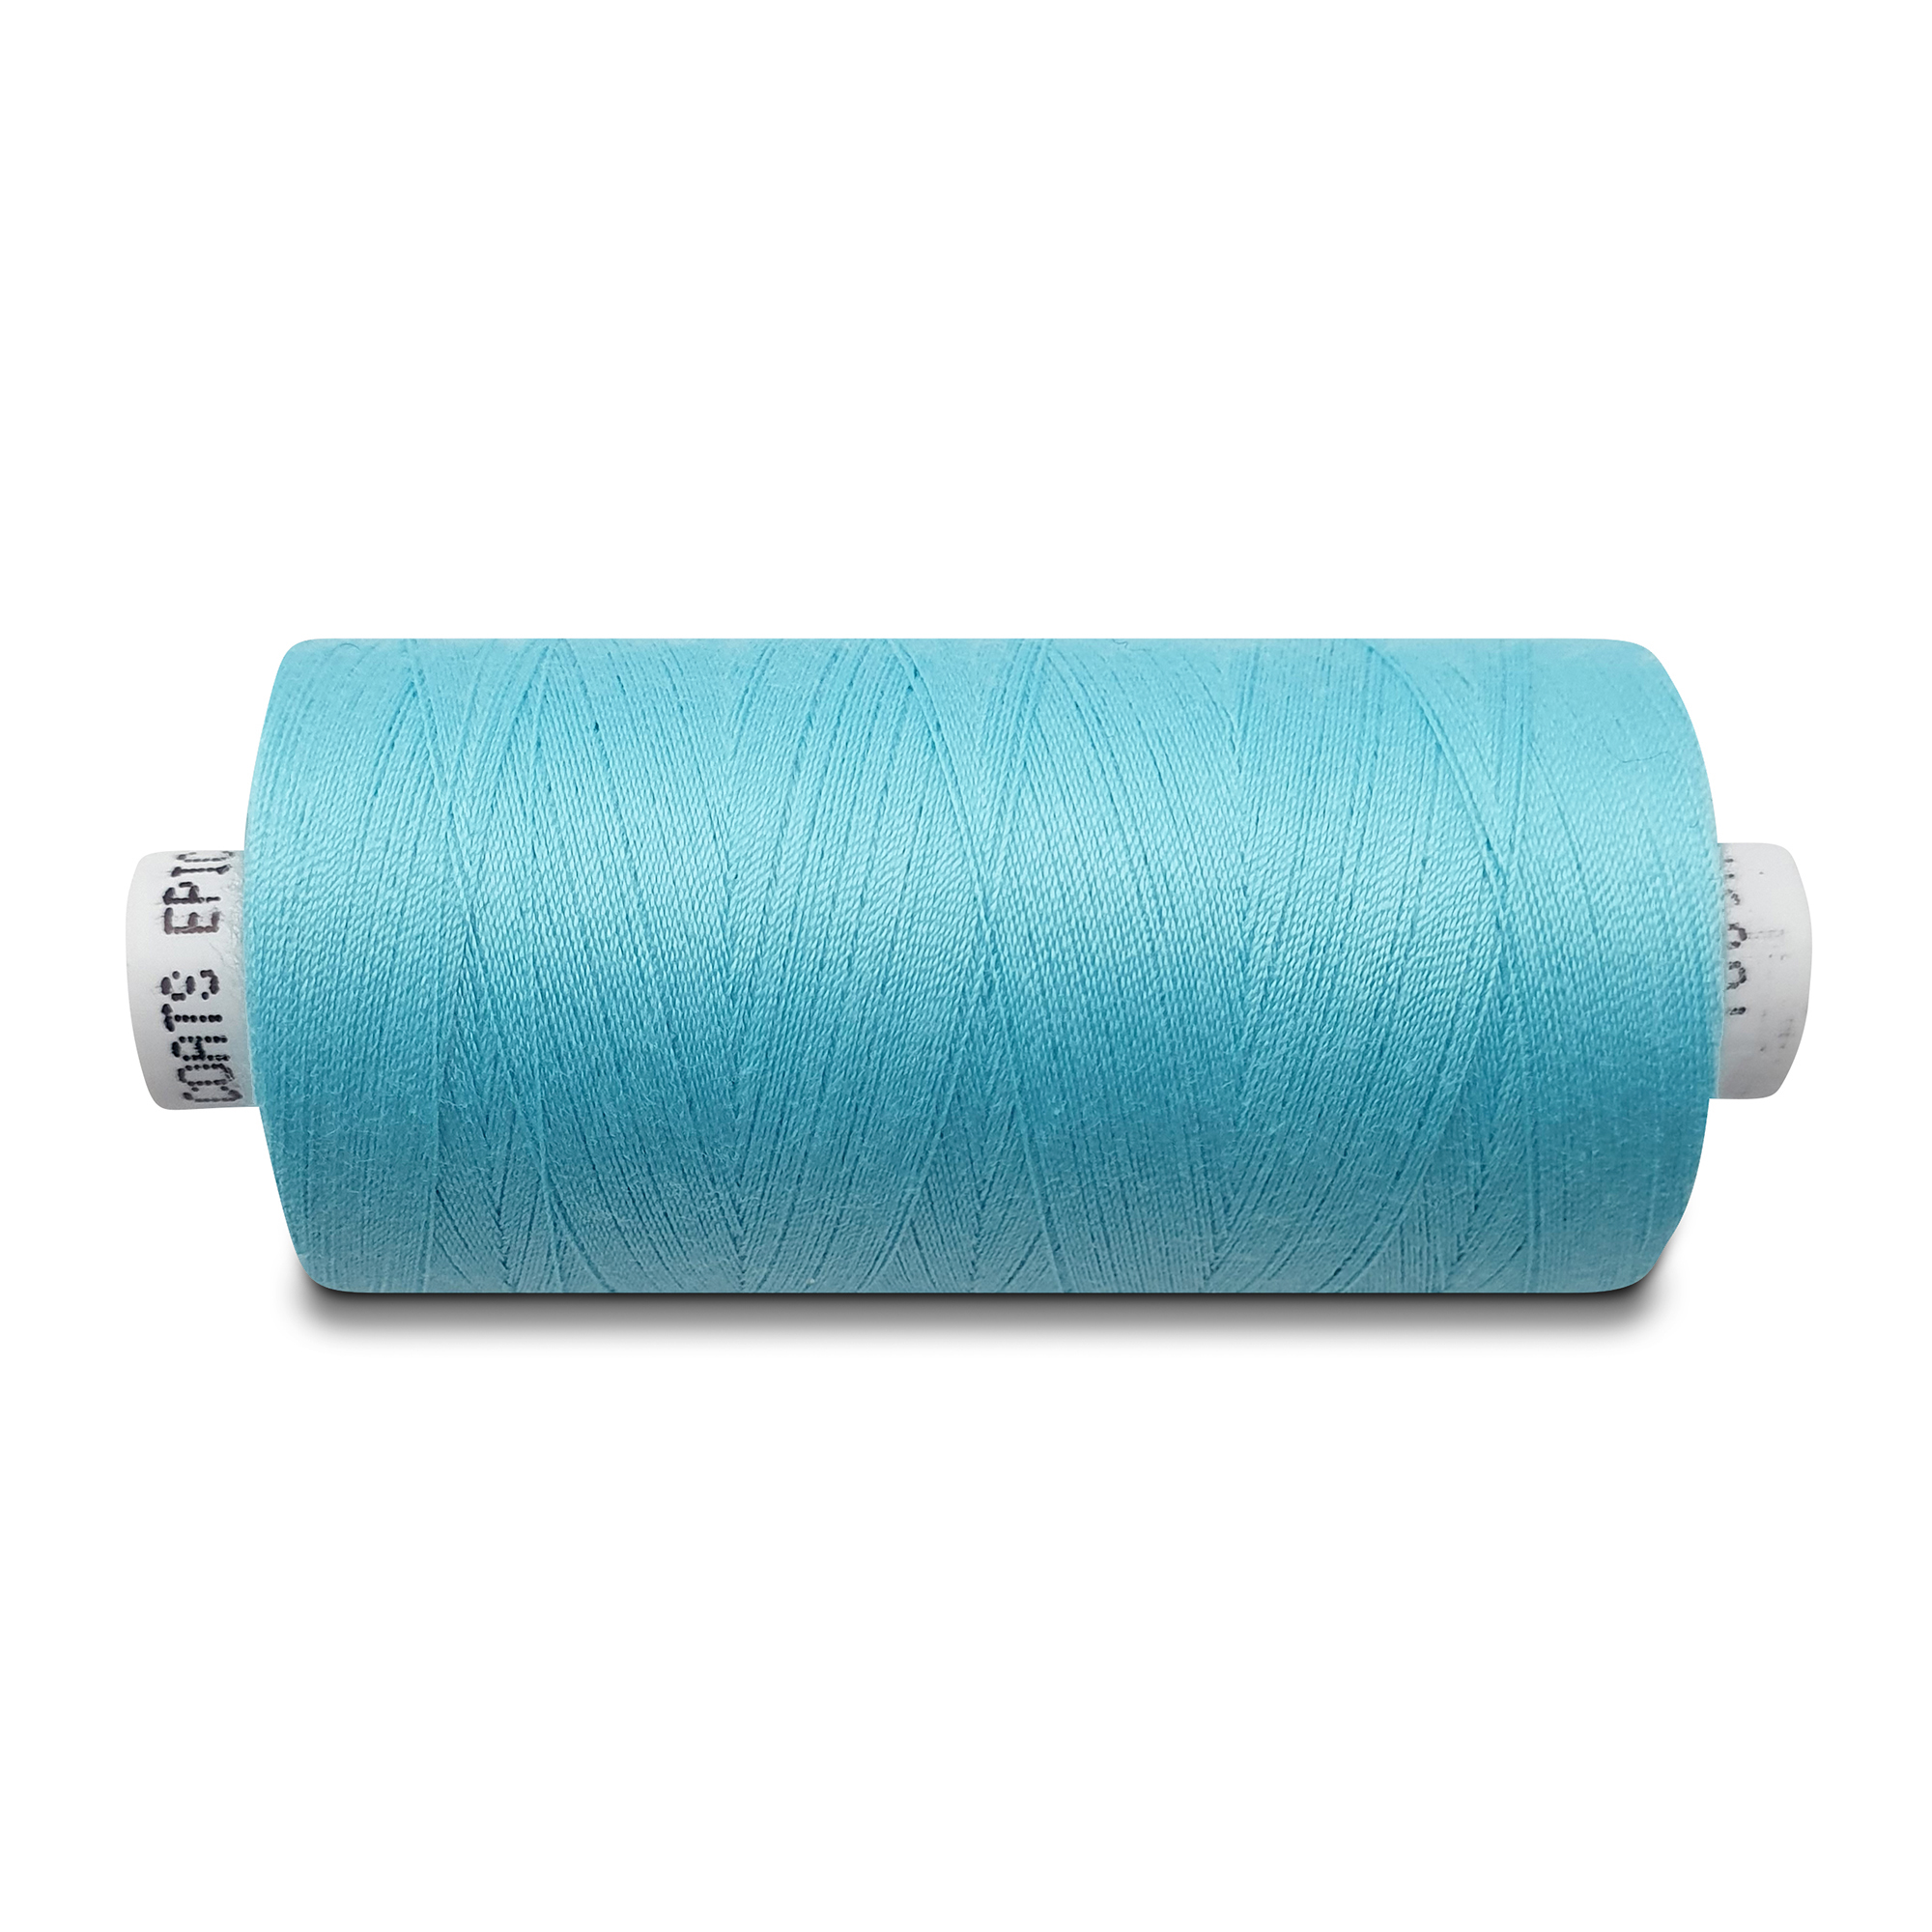 Leather/Sewing thread greenish-turquoise